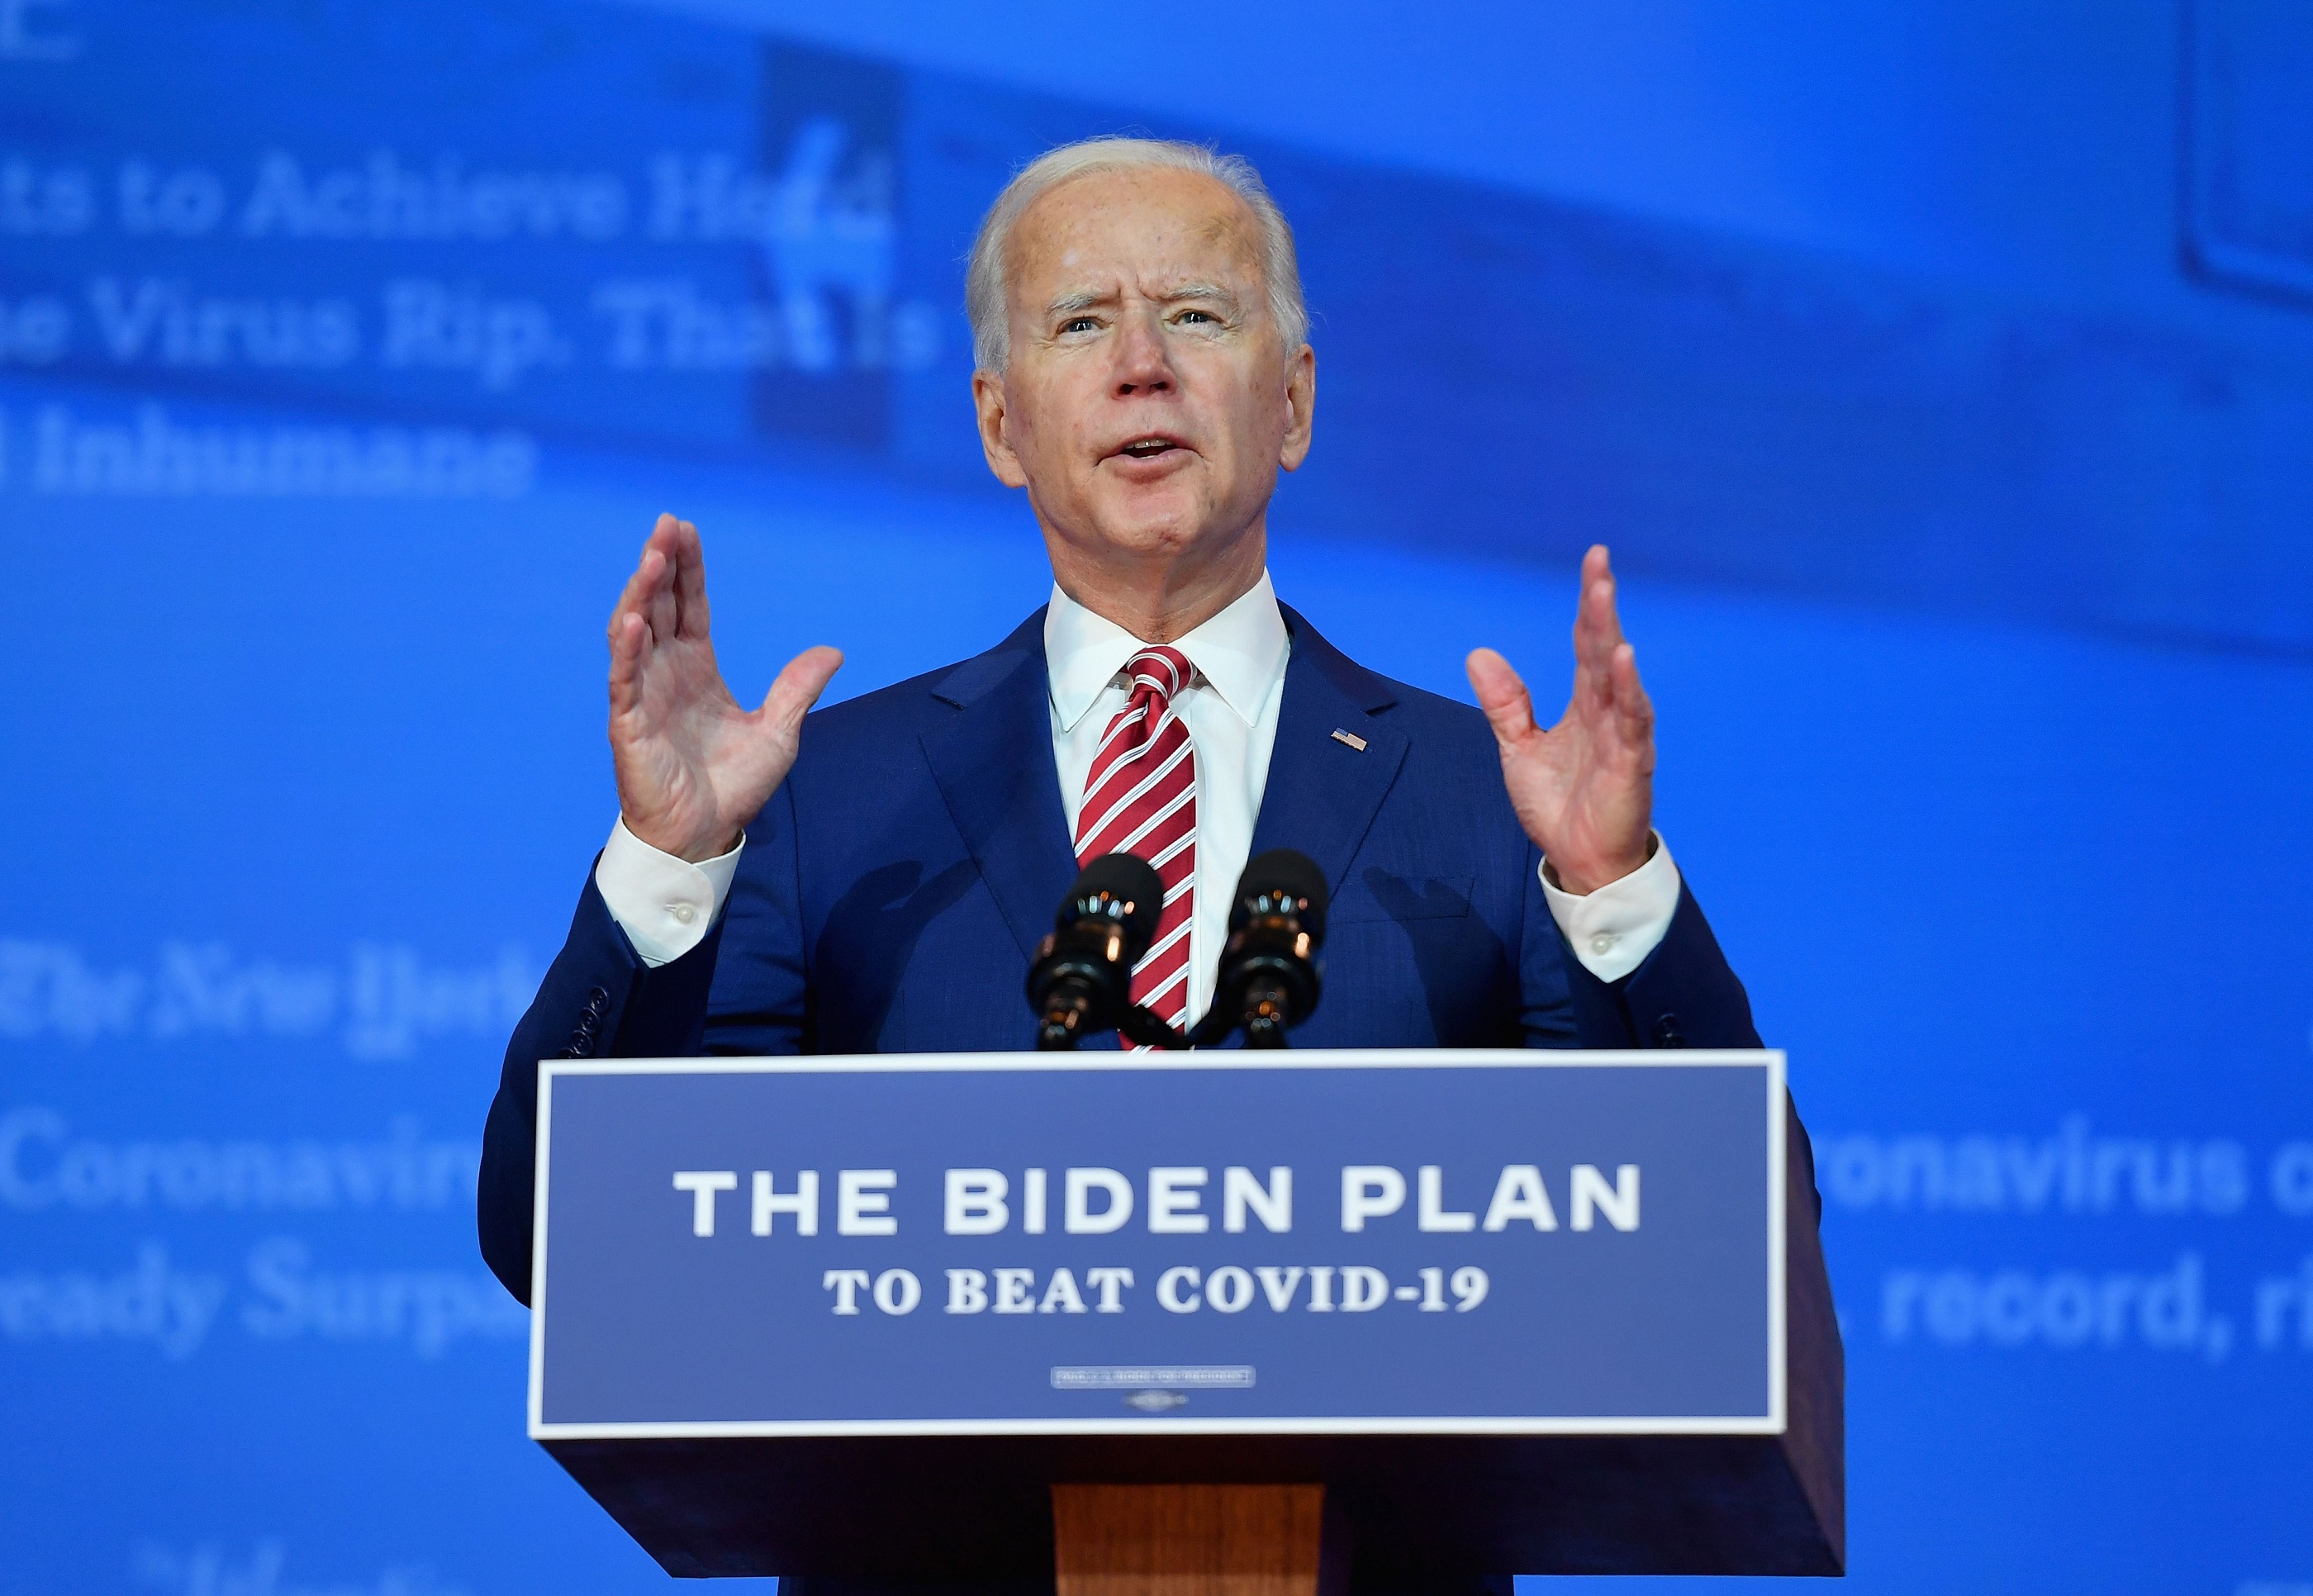 What will a Biden administration mean for tech policy? - Marketplace